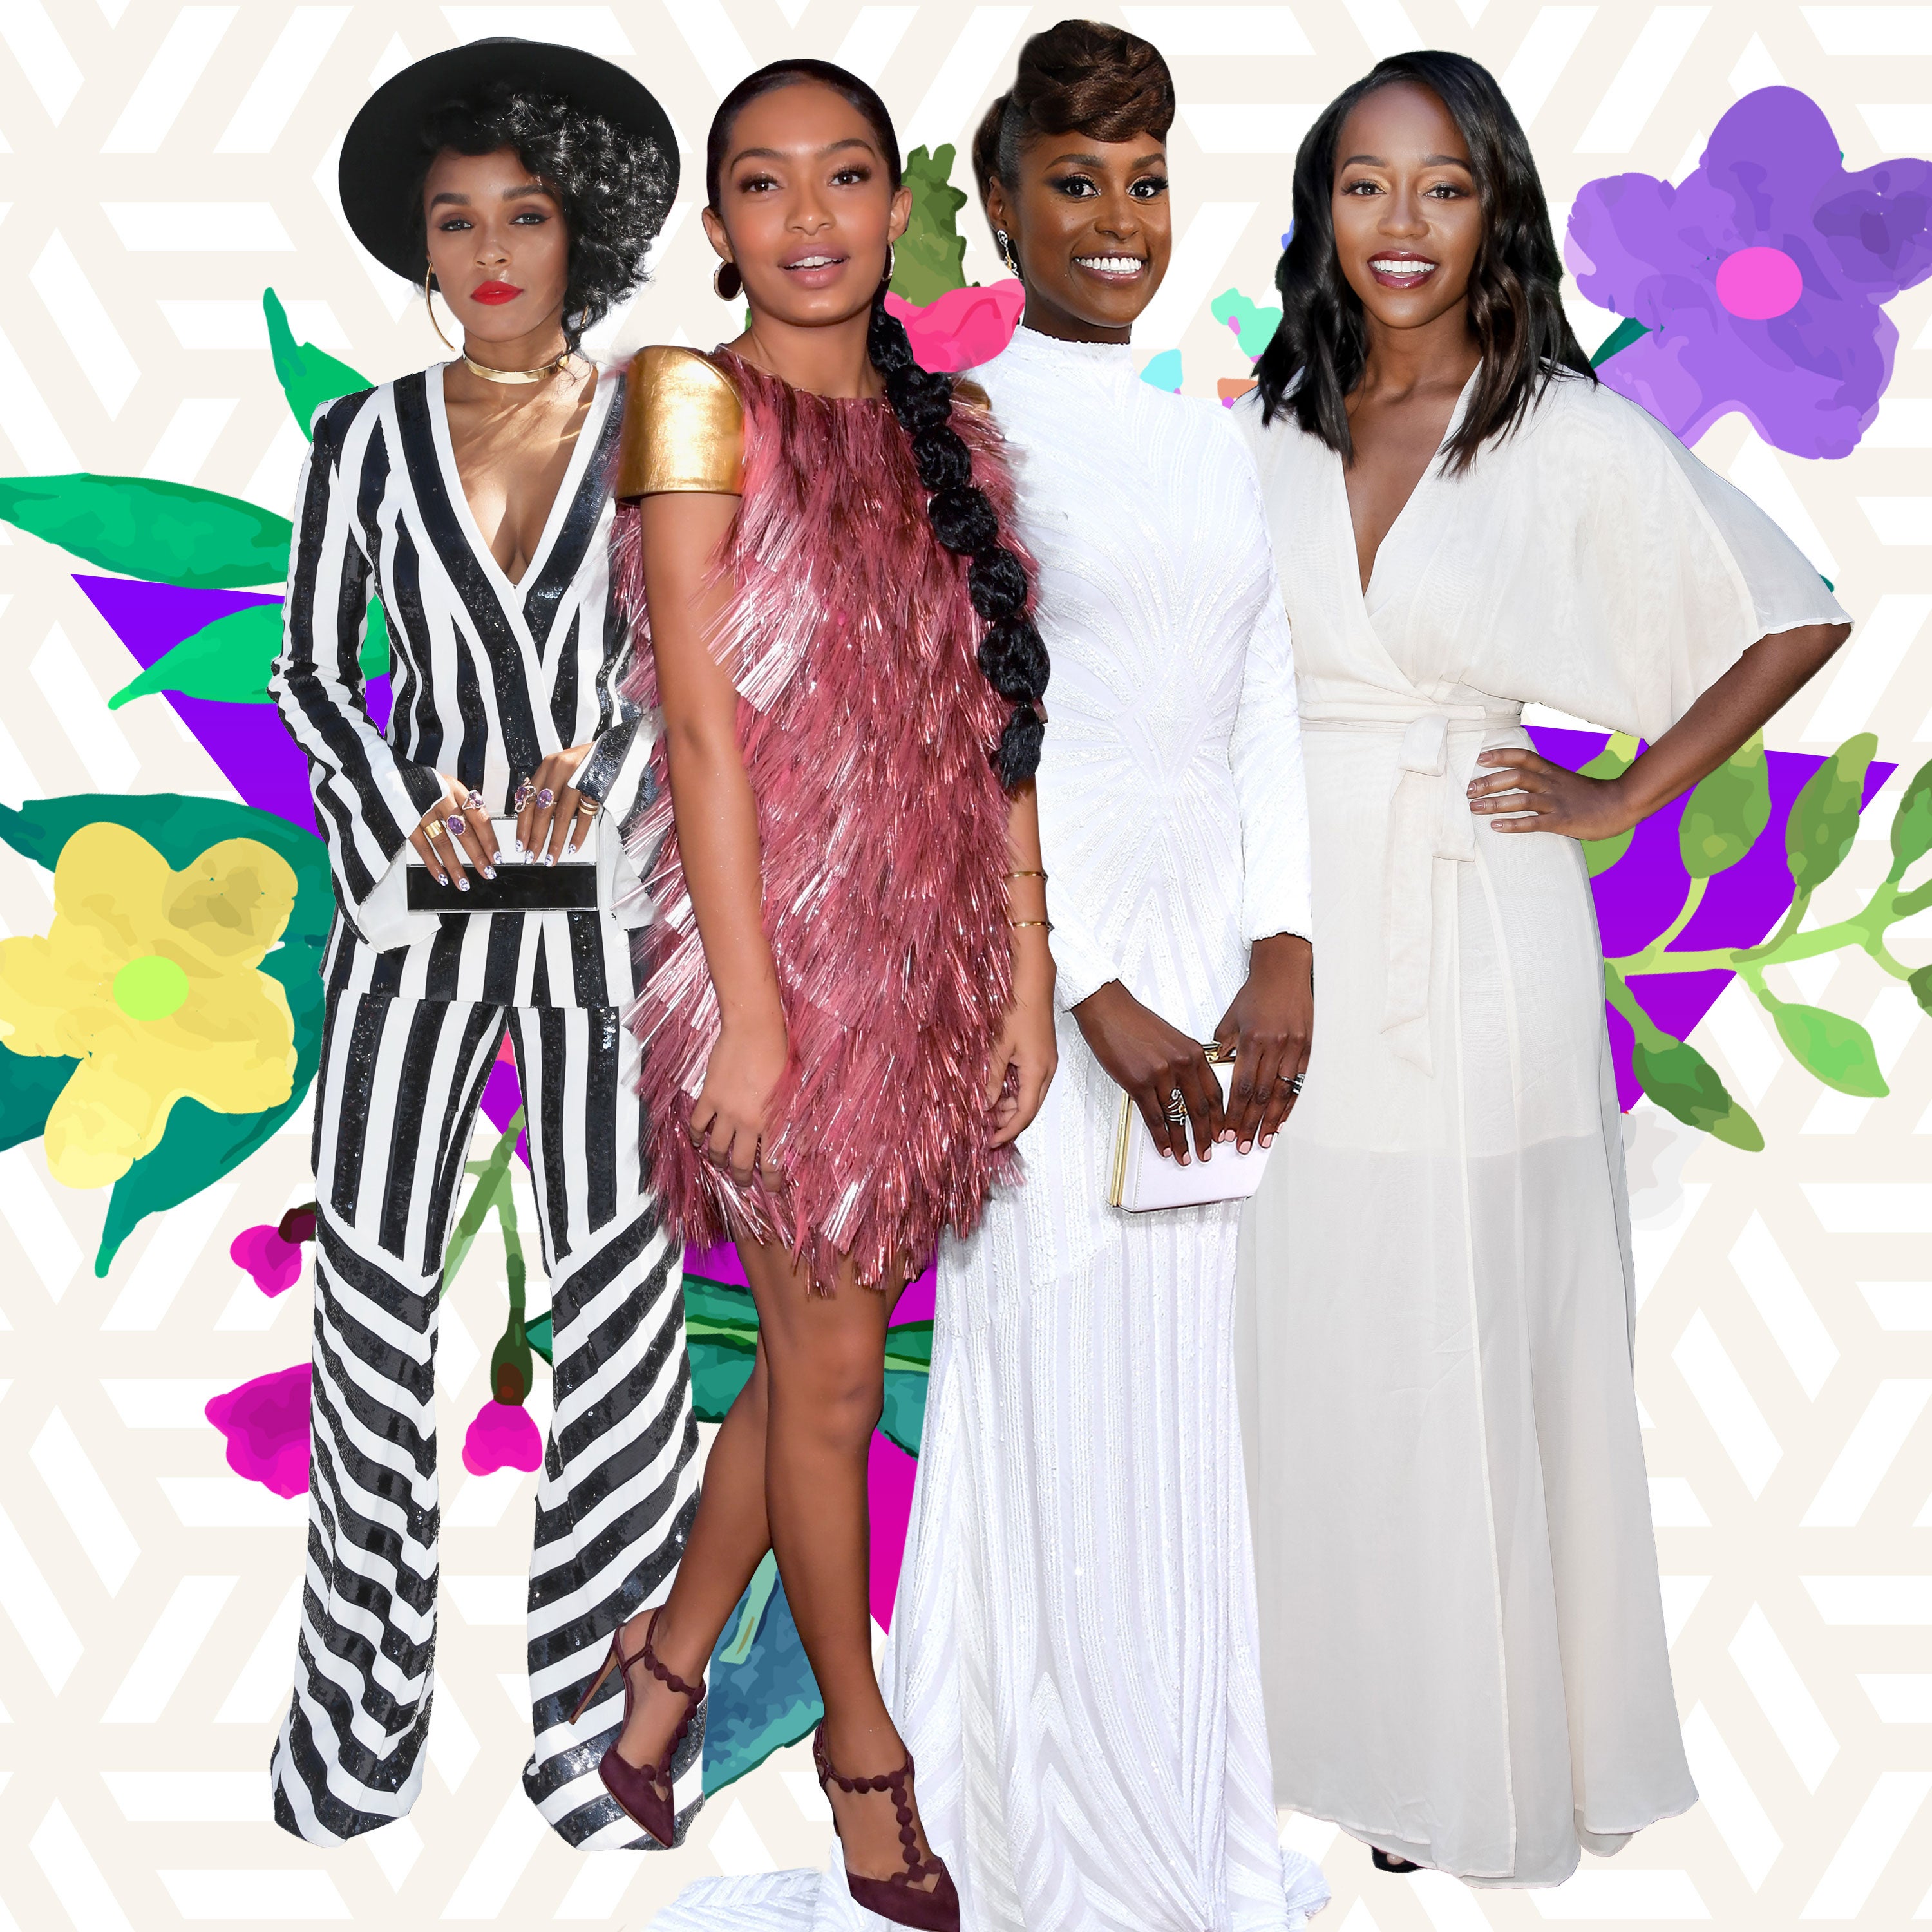 ESSENCE's 10th Annual Black Women in Hollywood Awards To Air On OWN